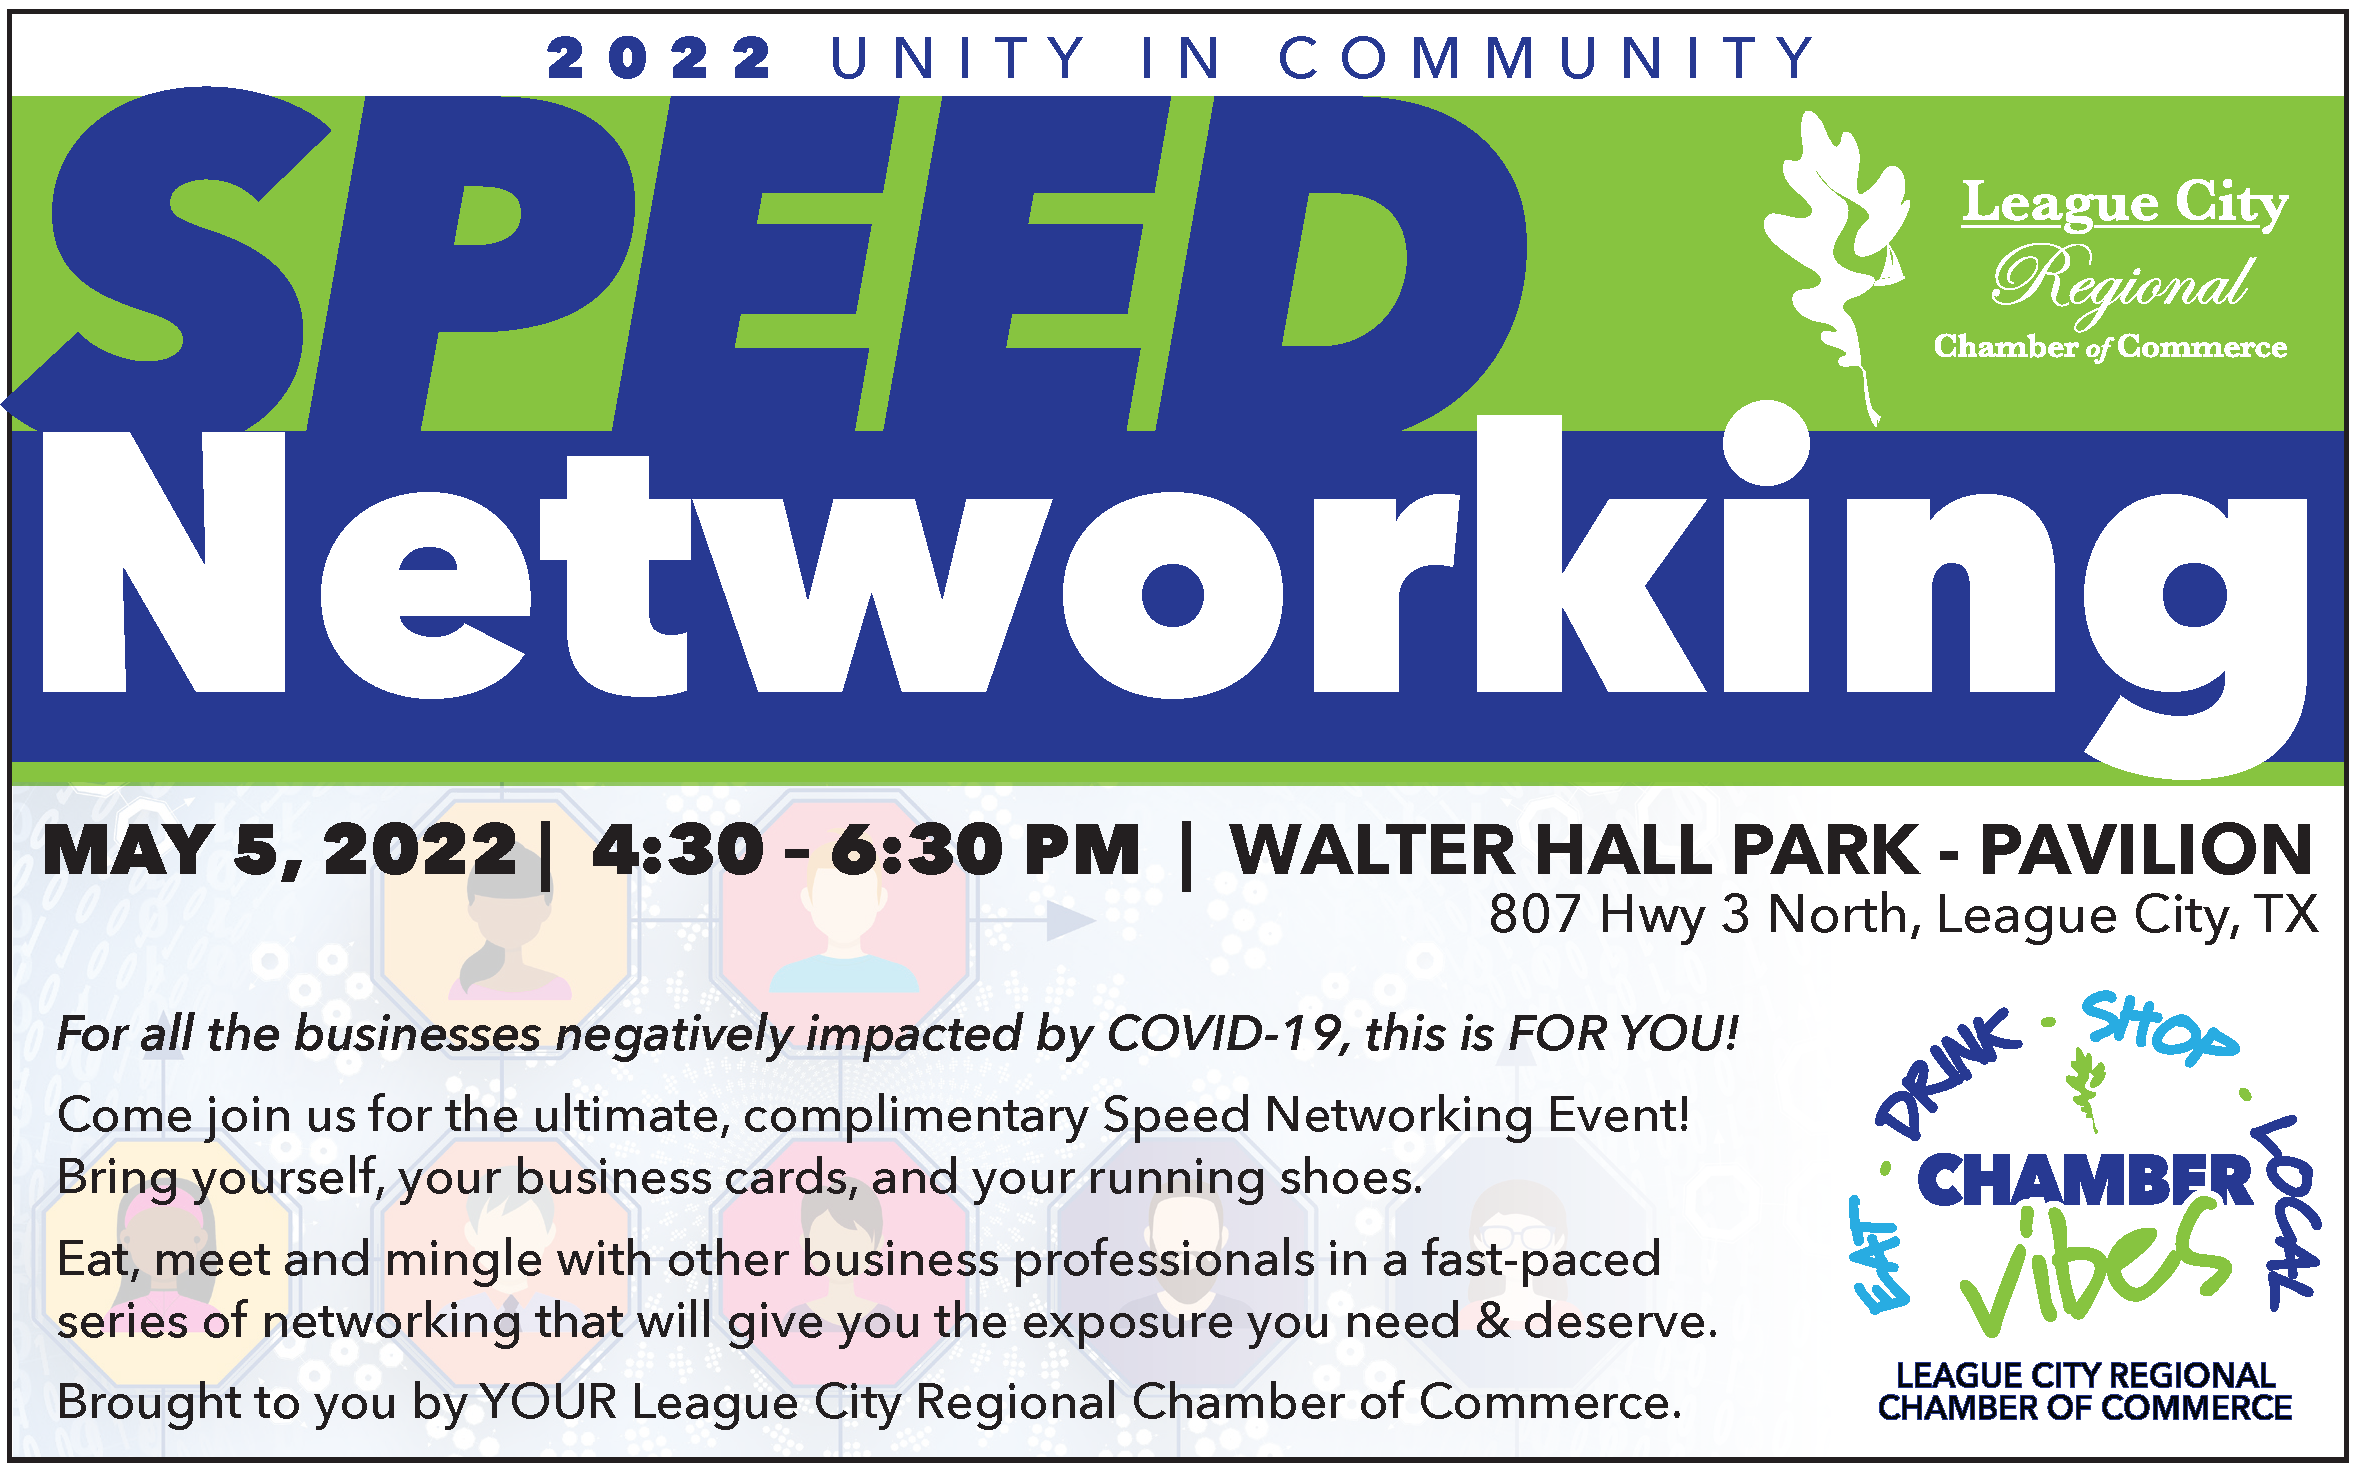 Make fast connections at SPEED NETWORKING!